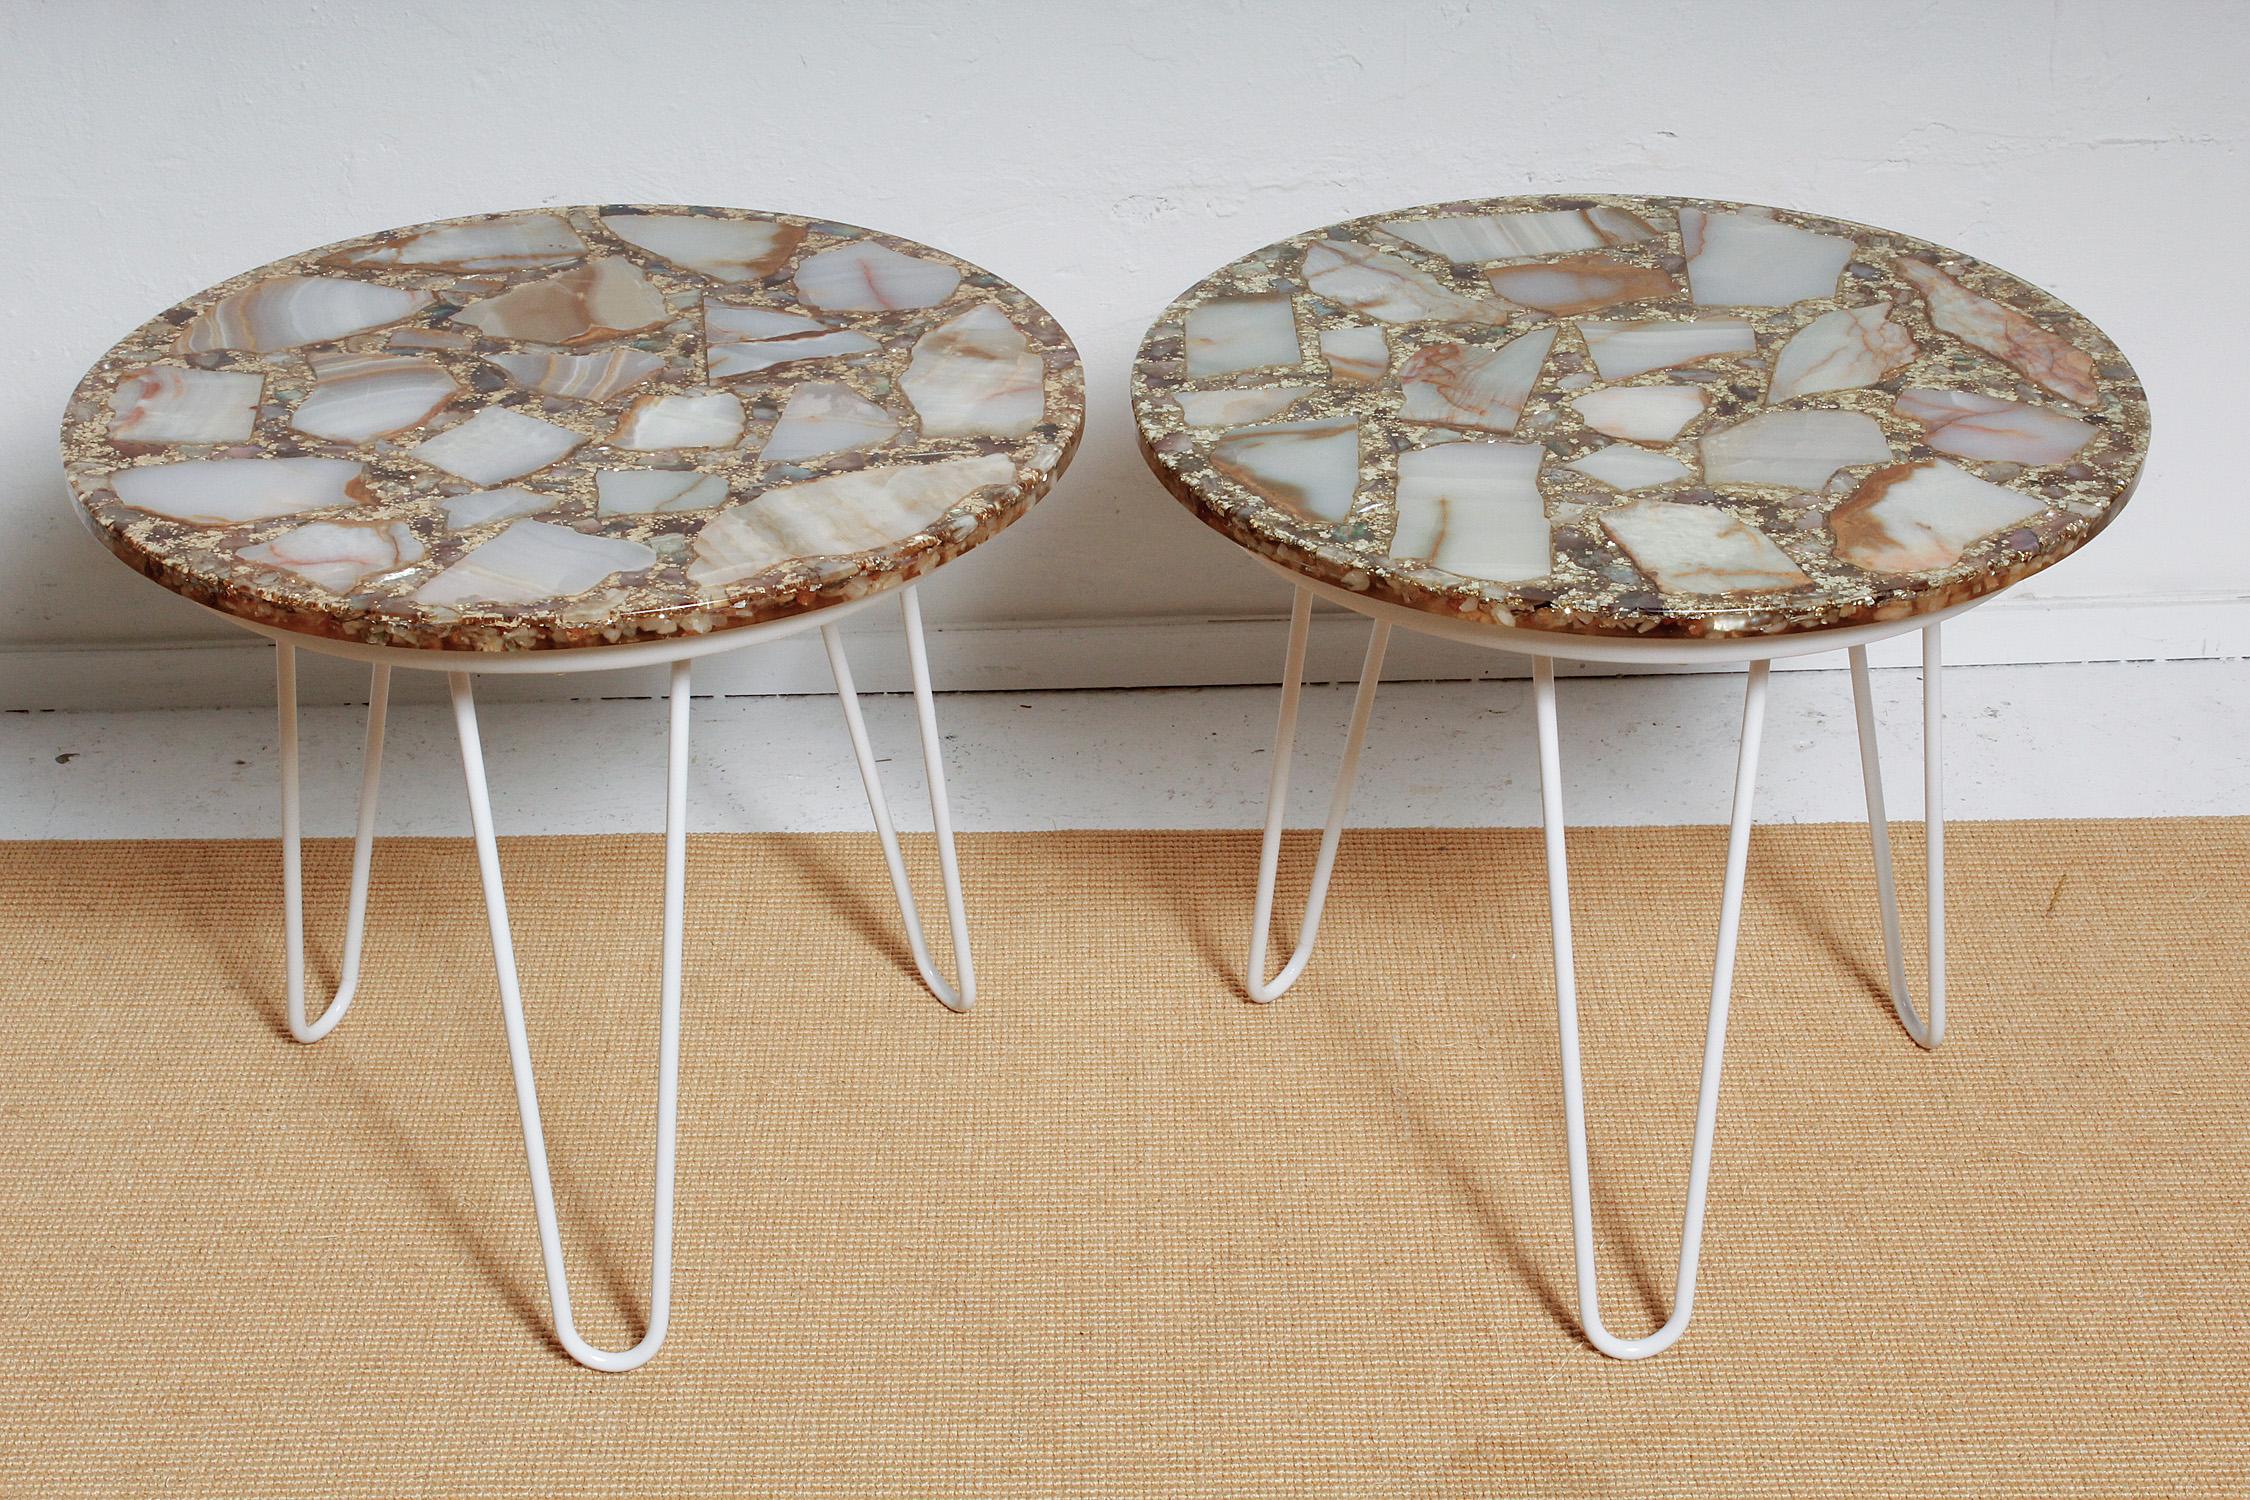 Fun and fabulous pair of 1960s Mexican side tables feature onyx specimens surrounded by bits of abalone and chunky gold glitter, all set in polished resin and perched atop white powder-coated hairpin legs.